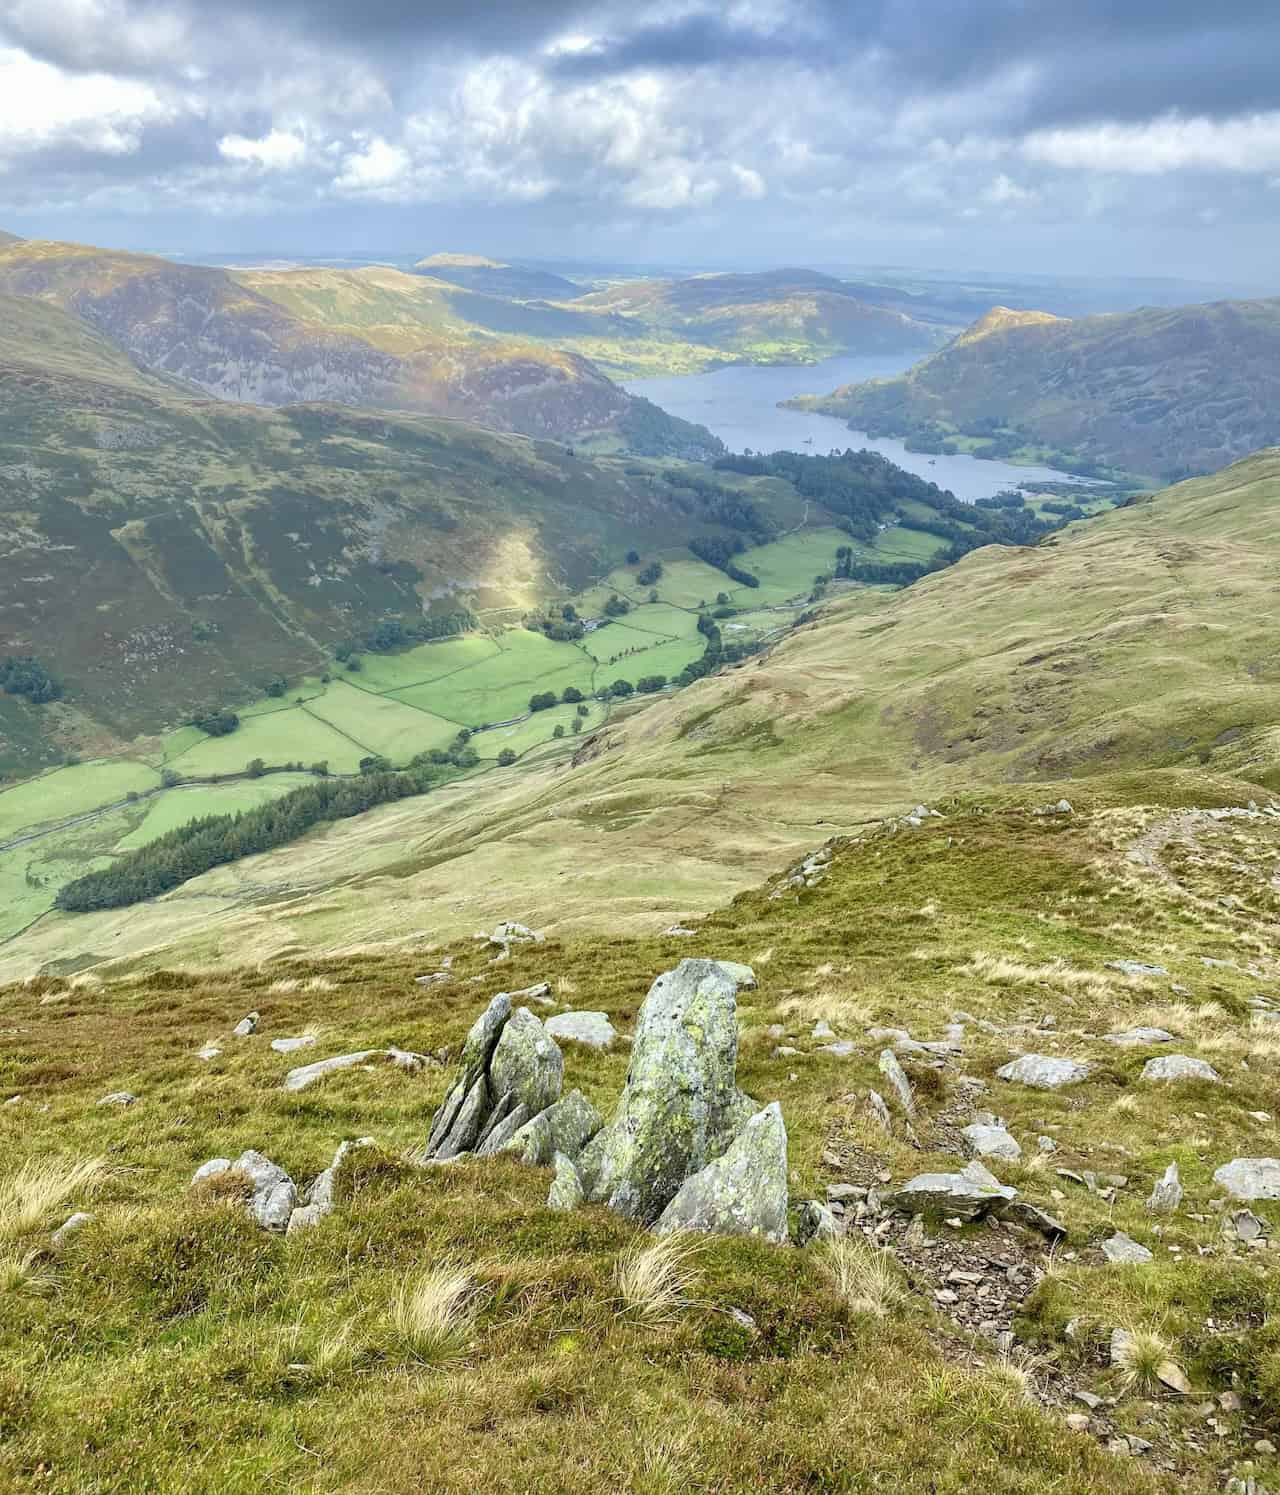 Looking down upon Grisedale, the valley which separates Birks and Birkhouse Moor.